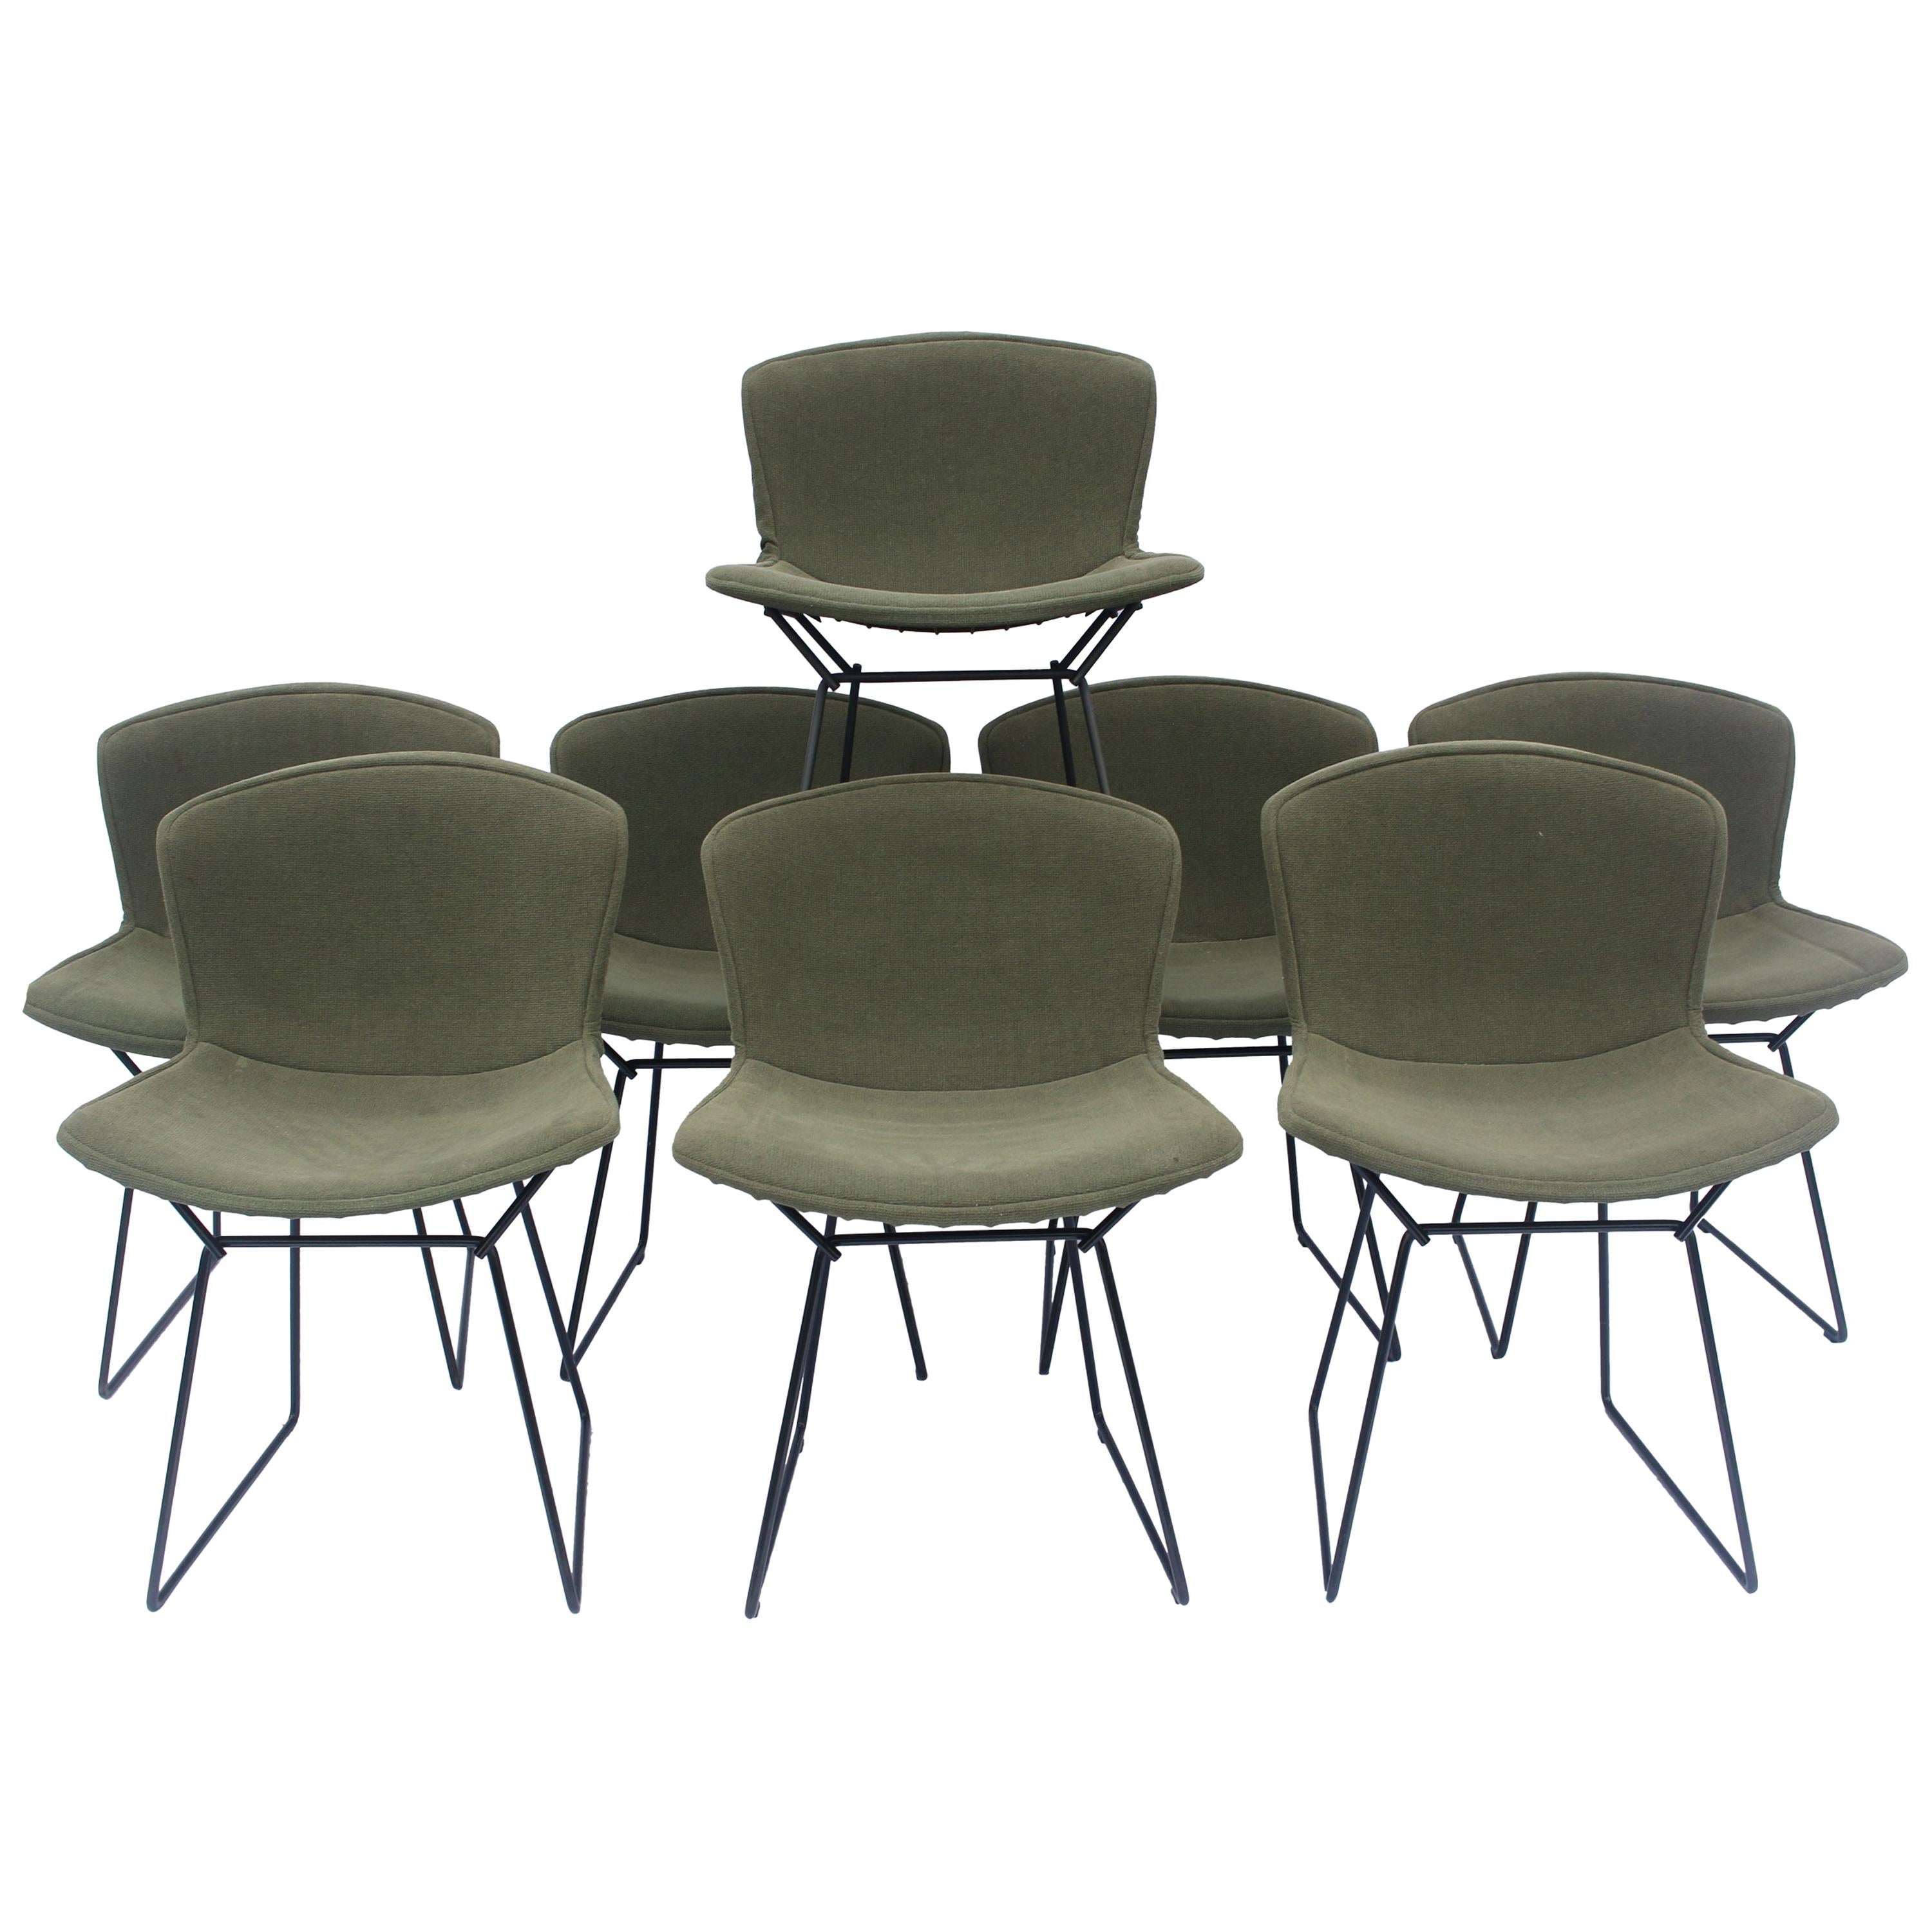 Set of 6 or 8 Harry Bertoia for Knoll Wire Chairs, 1960s-1970s